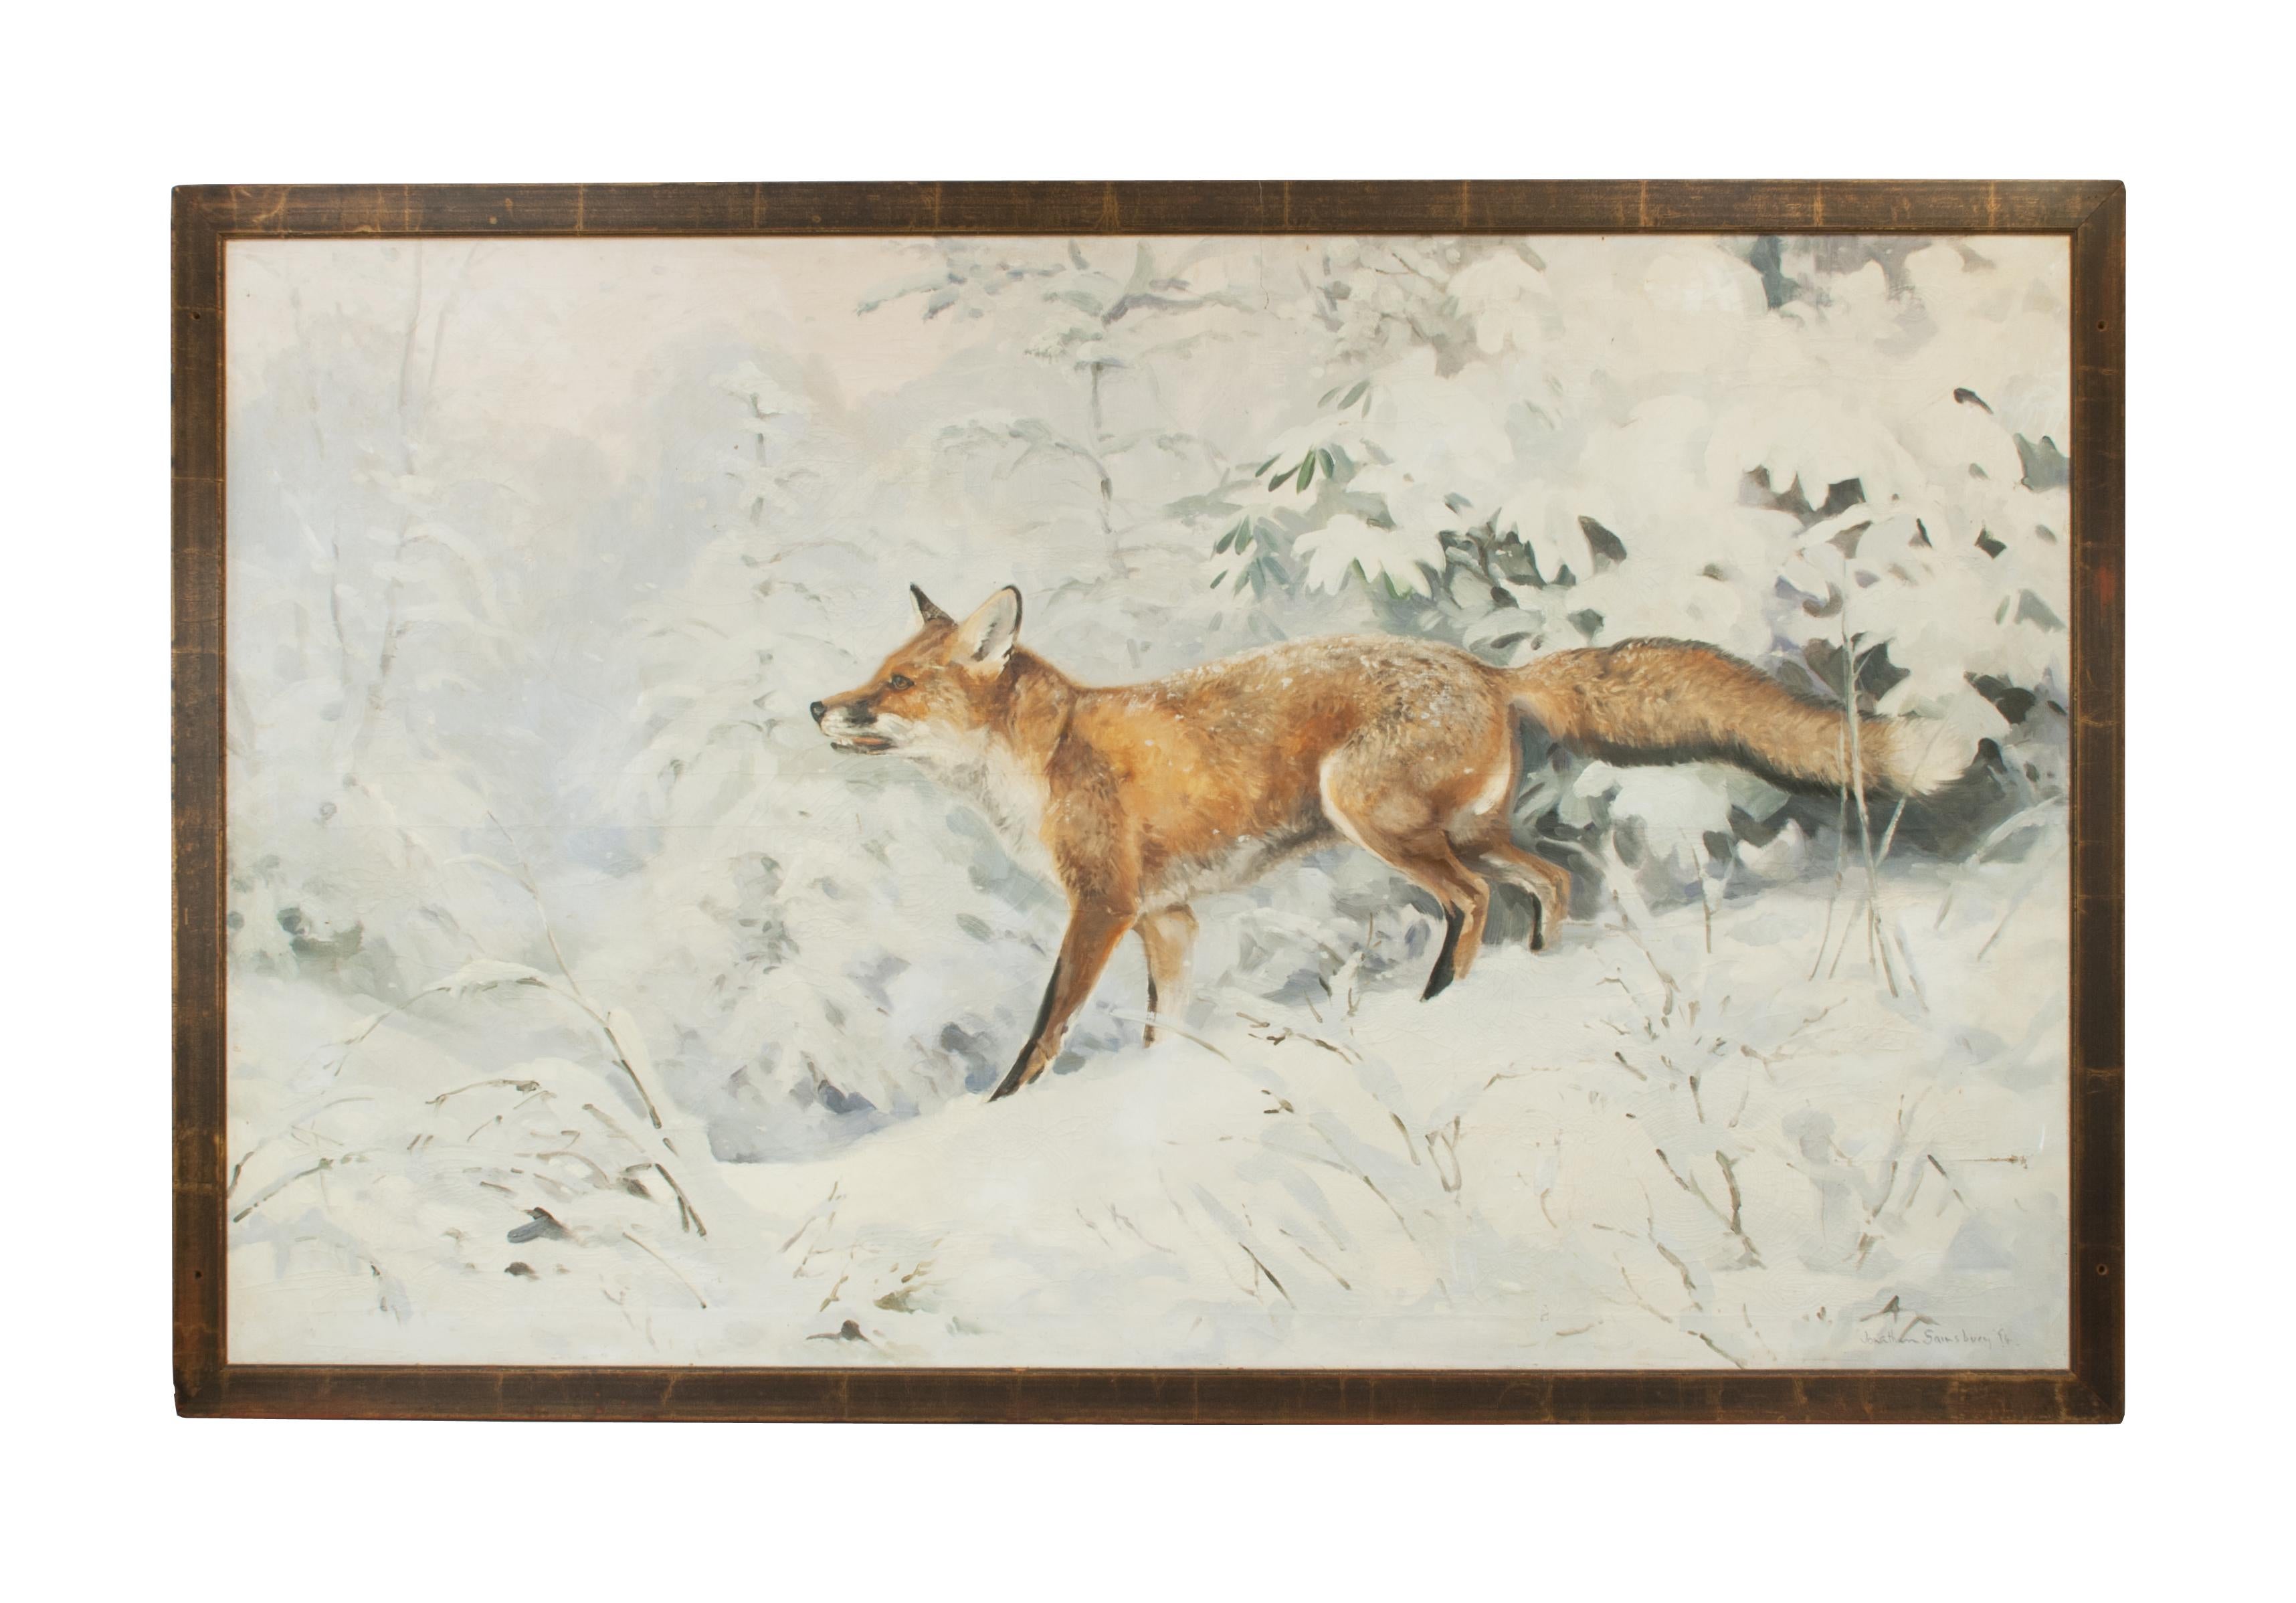 Large fox painting, oil on canvas by Jonathan Sainsbury.
A very large oil on canvas of a fox in a winter snowy landscape by Jonathan Sainsbury. Signed and dated by the artist 'Jonathan Sainsbury 94'. Jonathan has been painting Nature all his